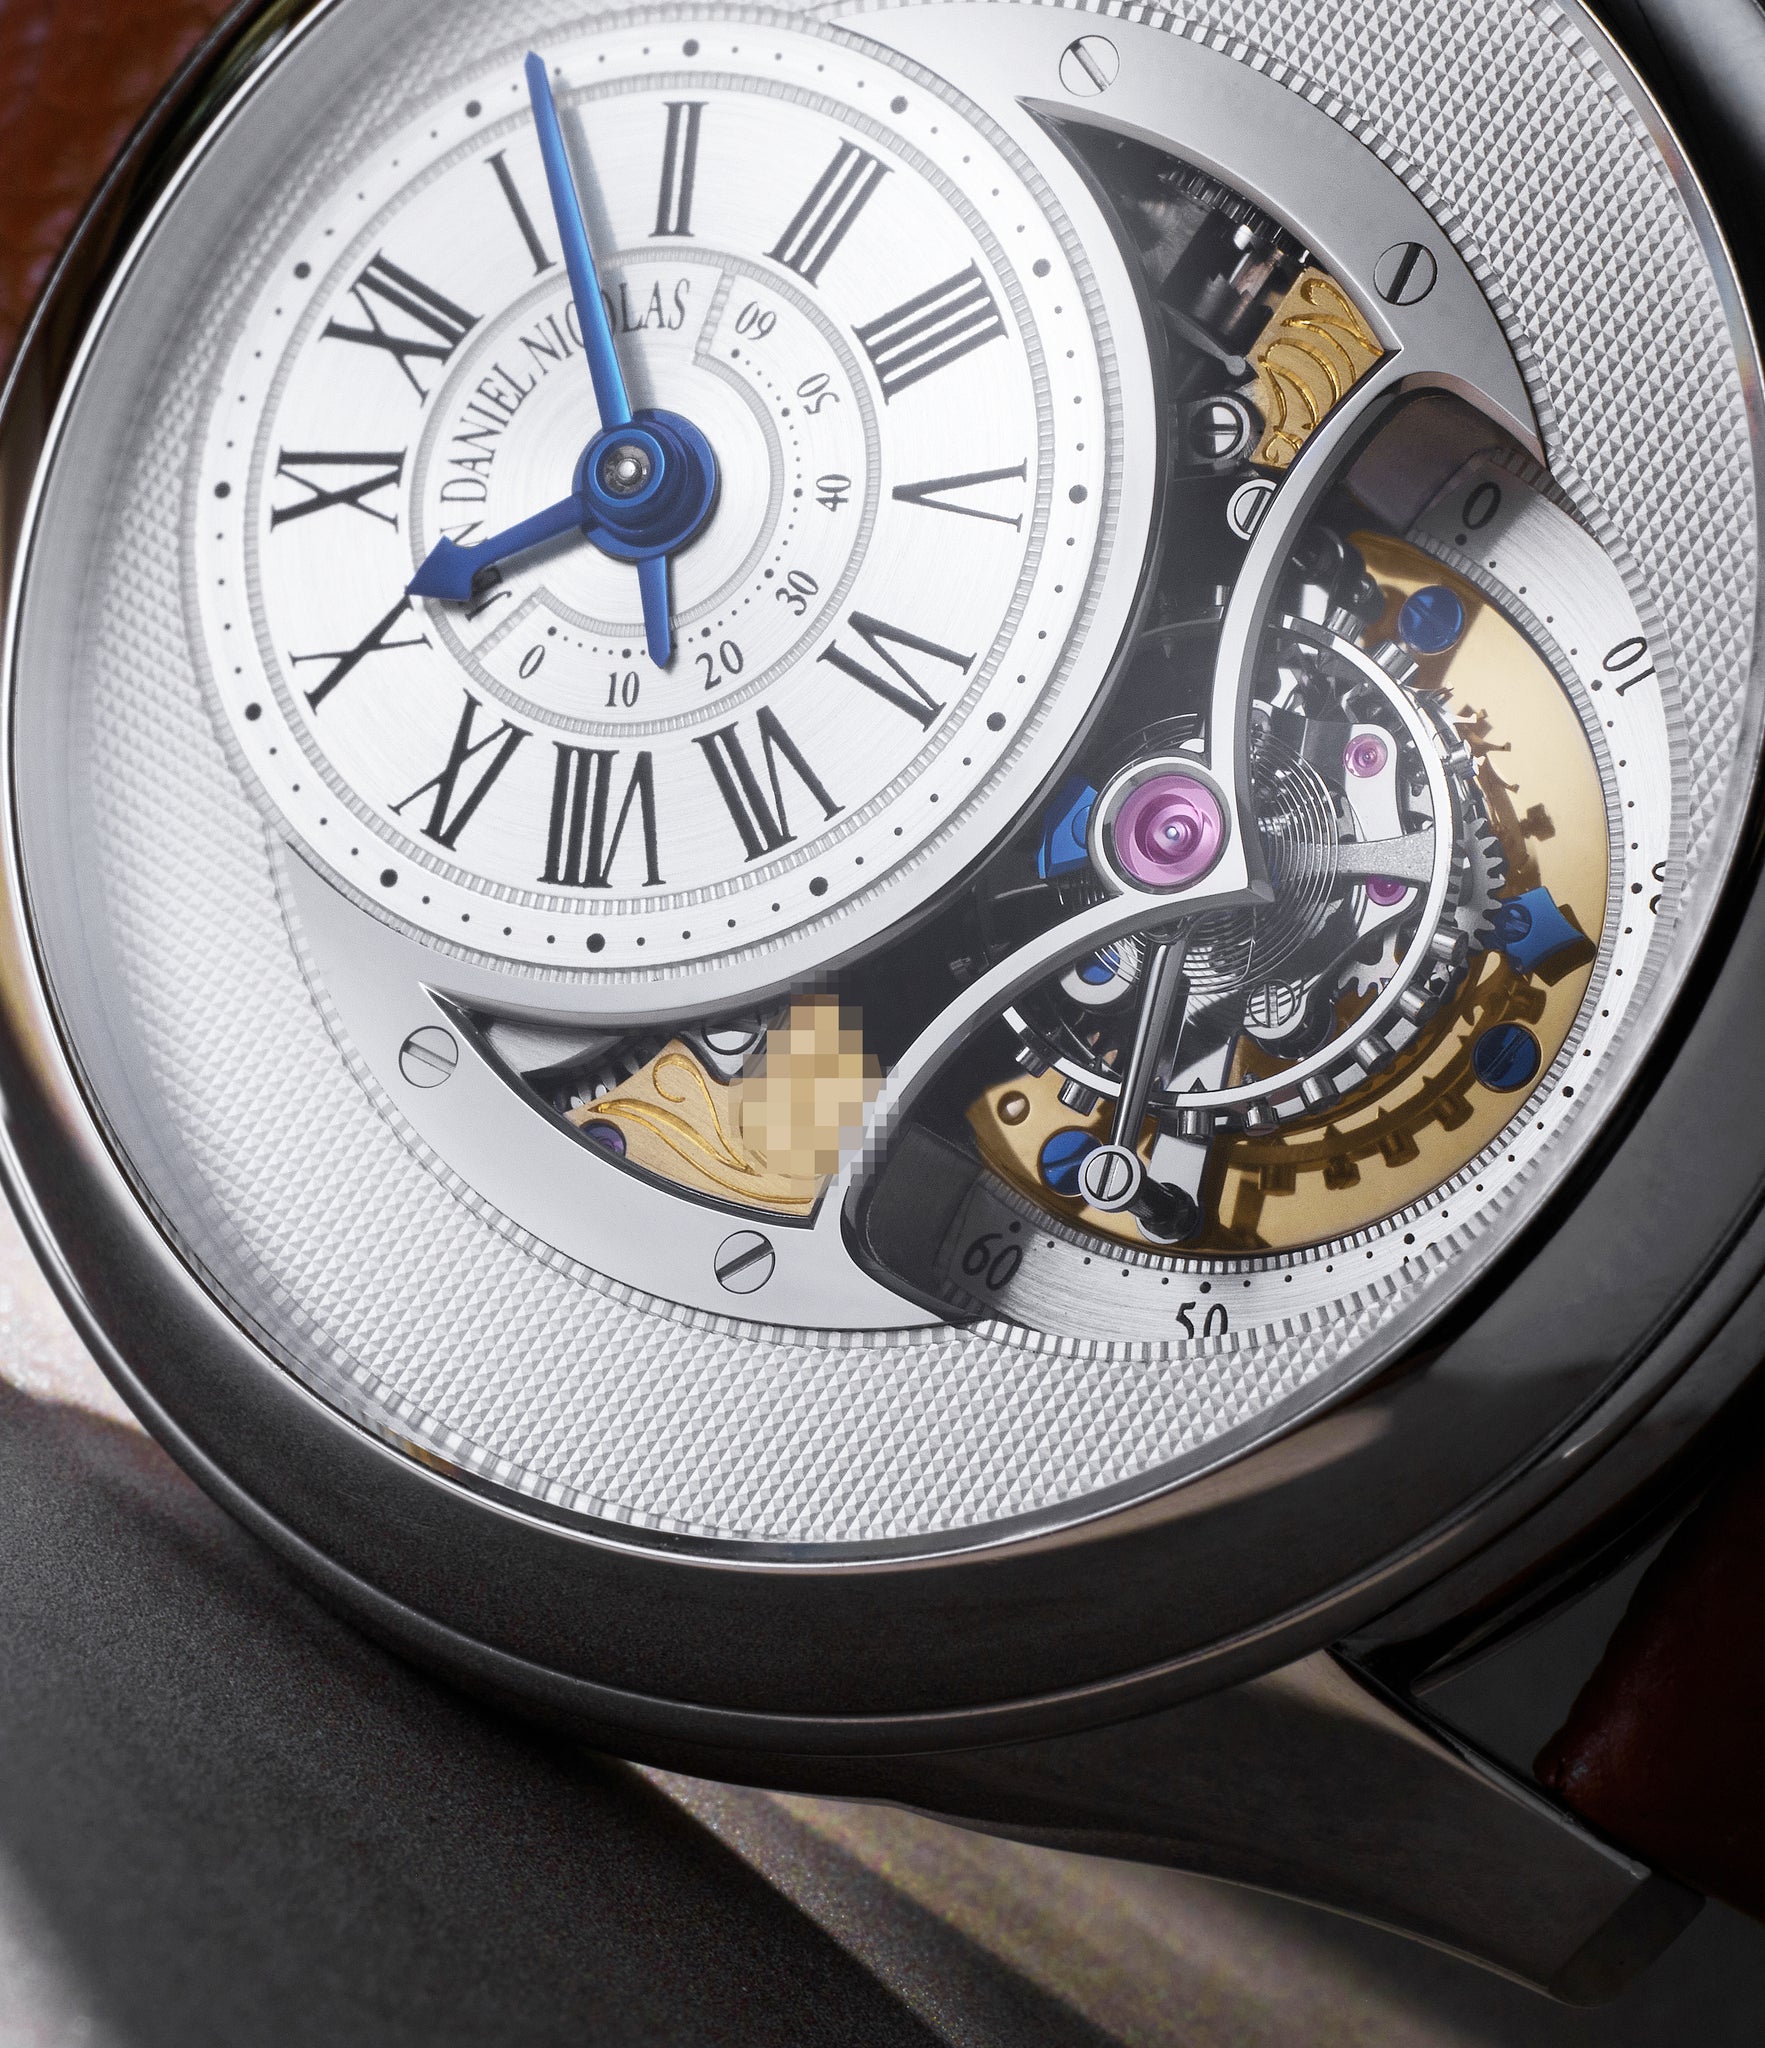 buy Jean Daniel Nicolas Two-Minute Tourbillon R PL Platinum preowned watch at A Collected Man London